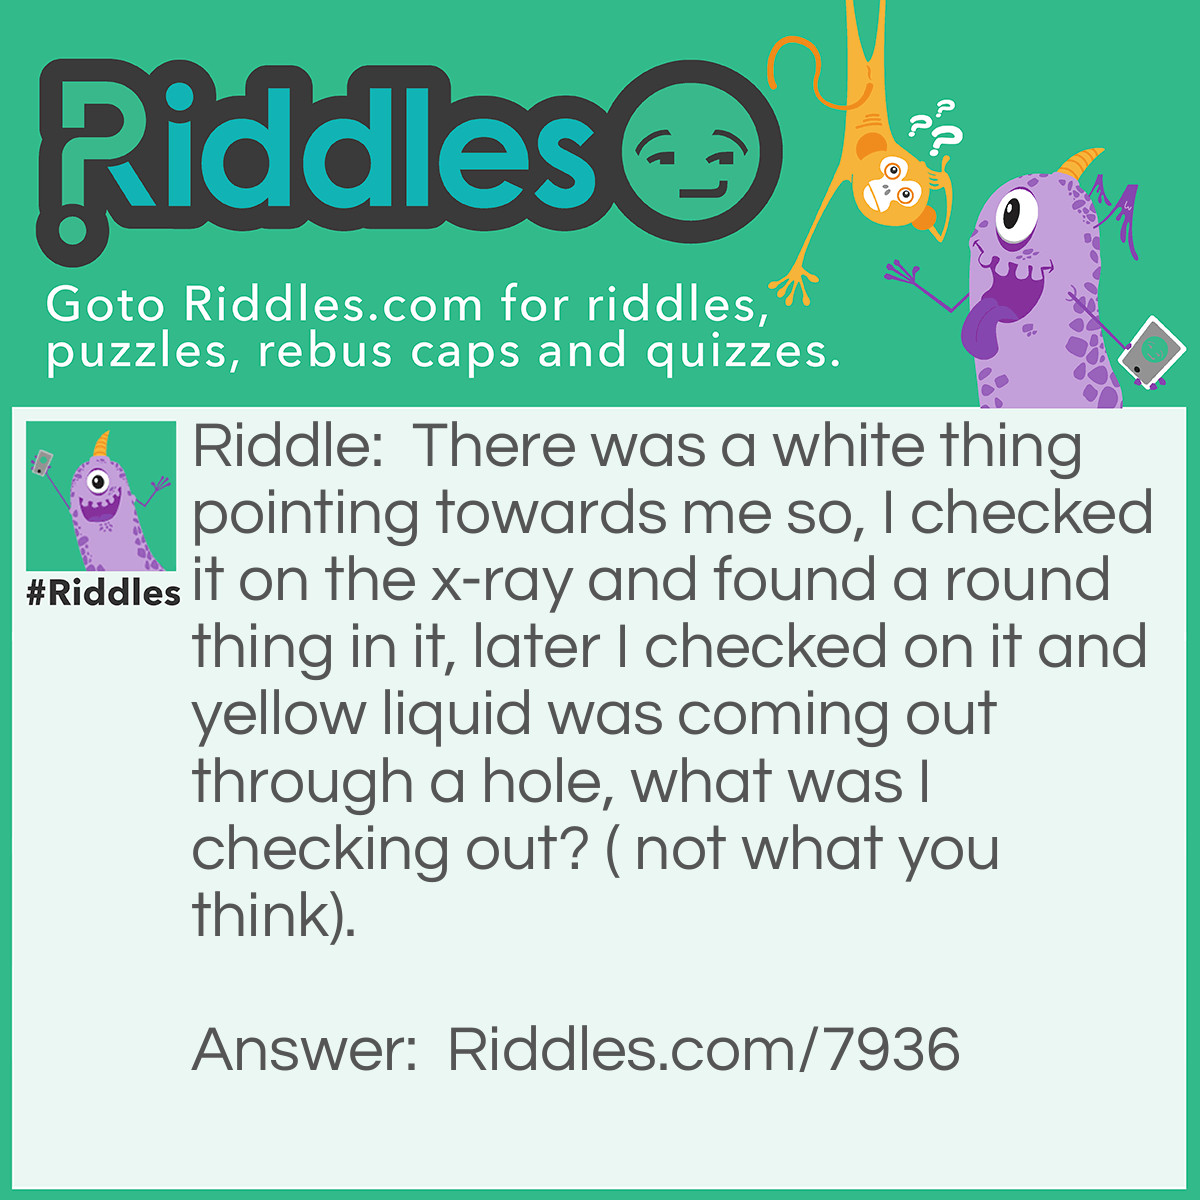 Riddle: There was a white thing pointing towards me so, I checked it on the x-ray and found a round thing in it, later I checked on it and yellow liquid was coming out through a hole, what was I checking out? ( not what you think). Answer: An egg.